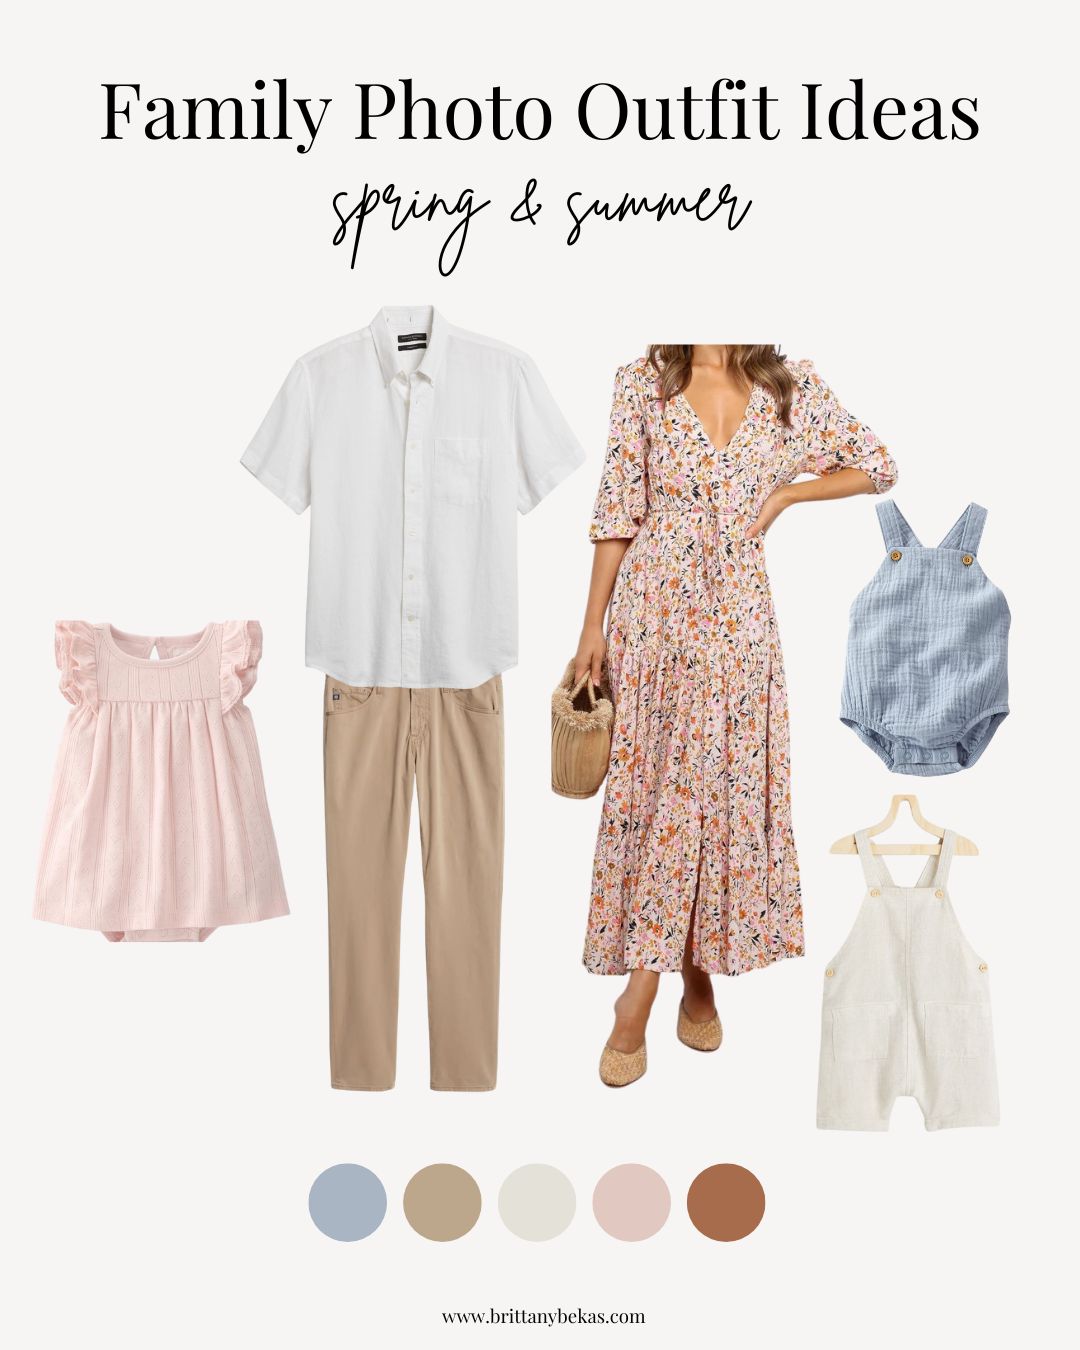 Family Photo Outfits | What to wear family photos